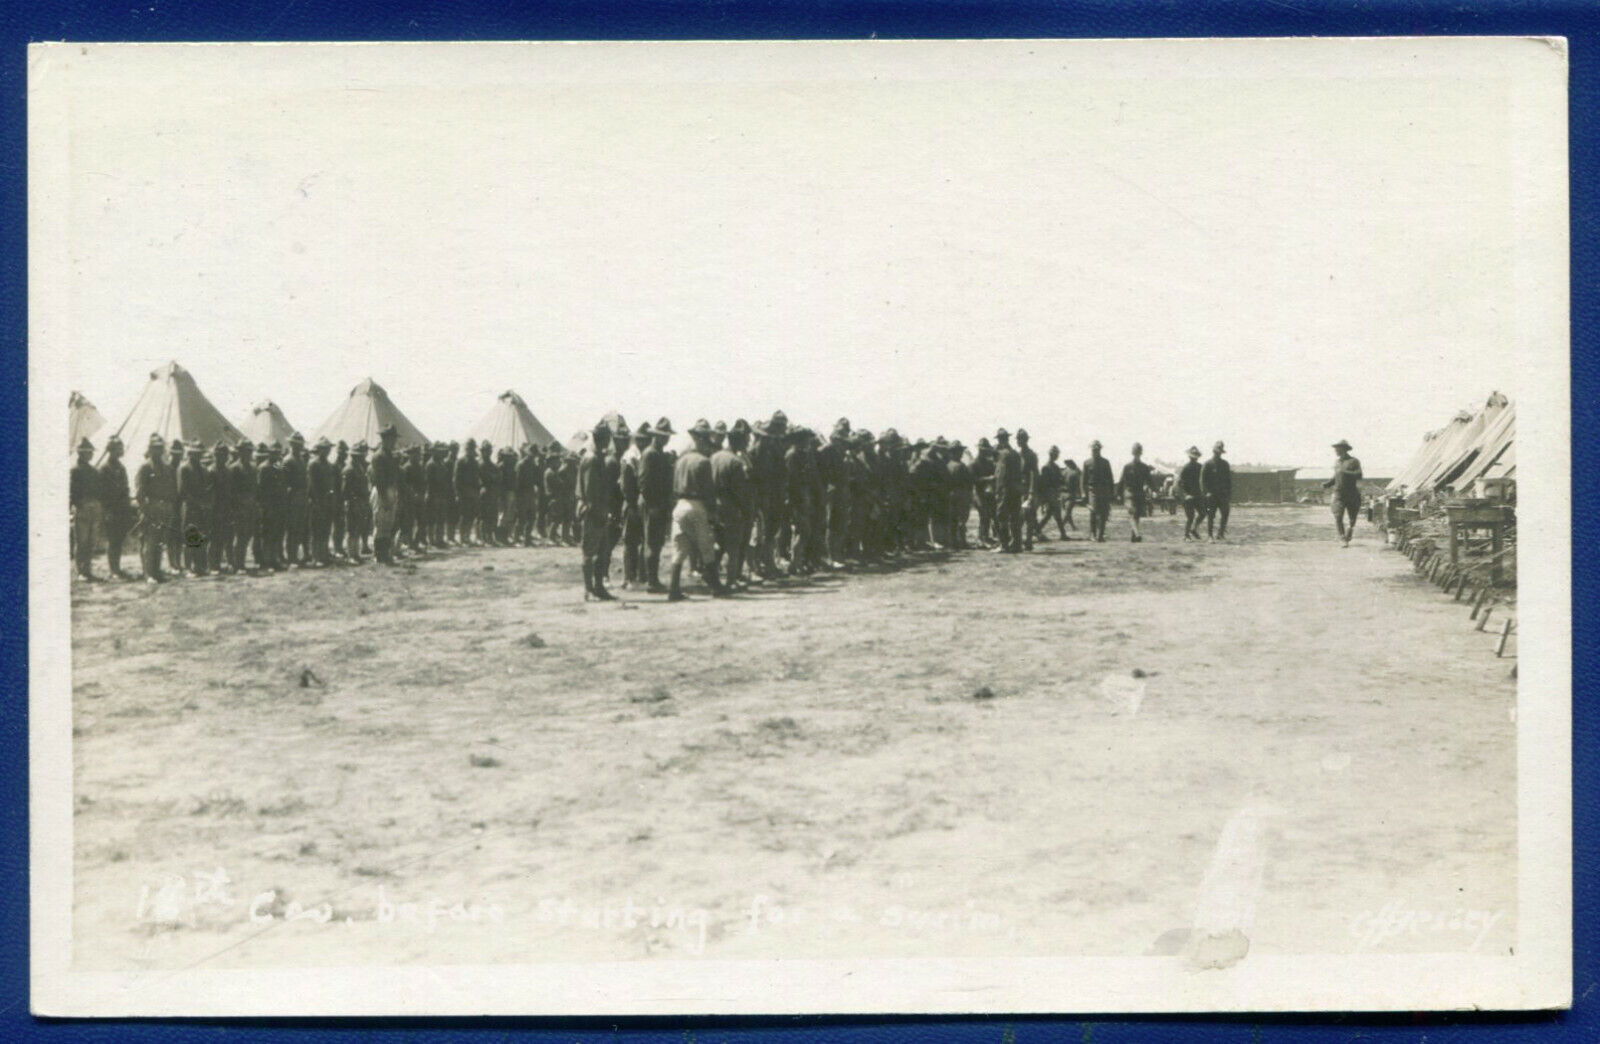 US Army WW1 Soldiers in Formation Tents Real Photo Postcard RPPC